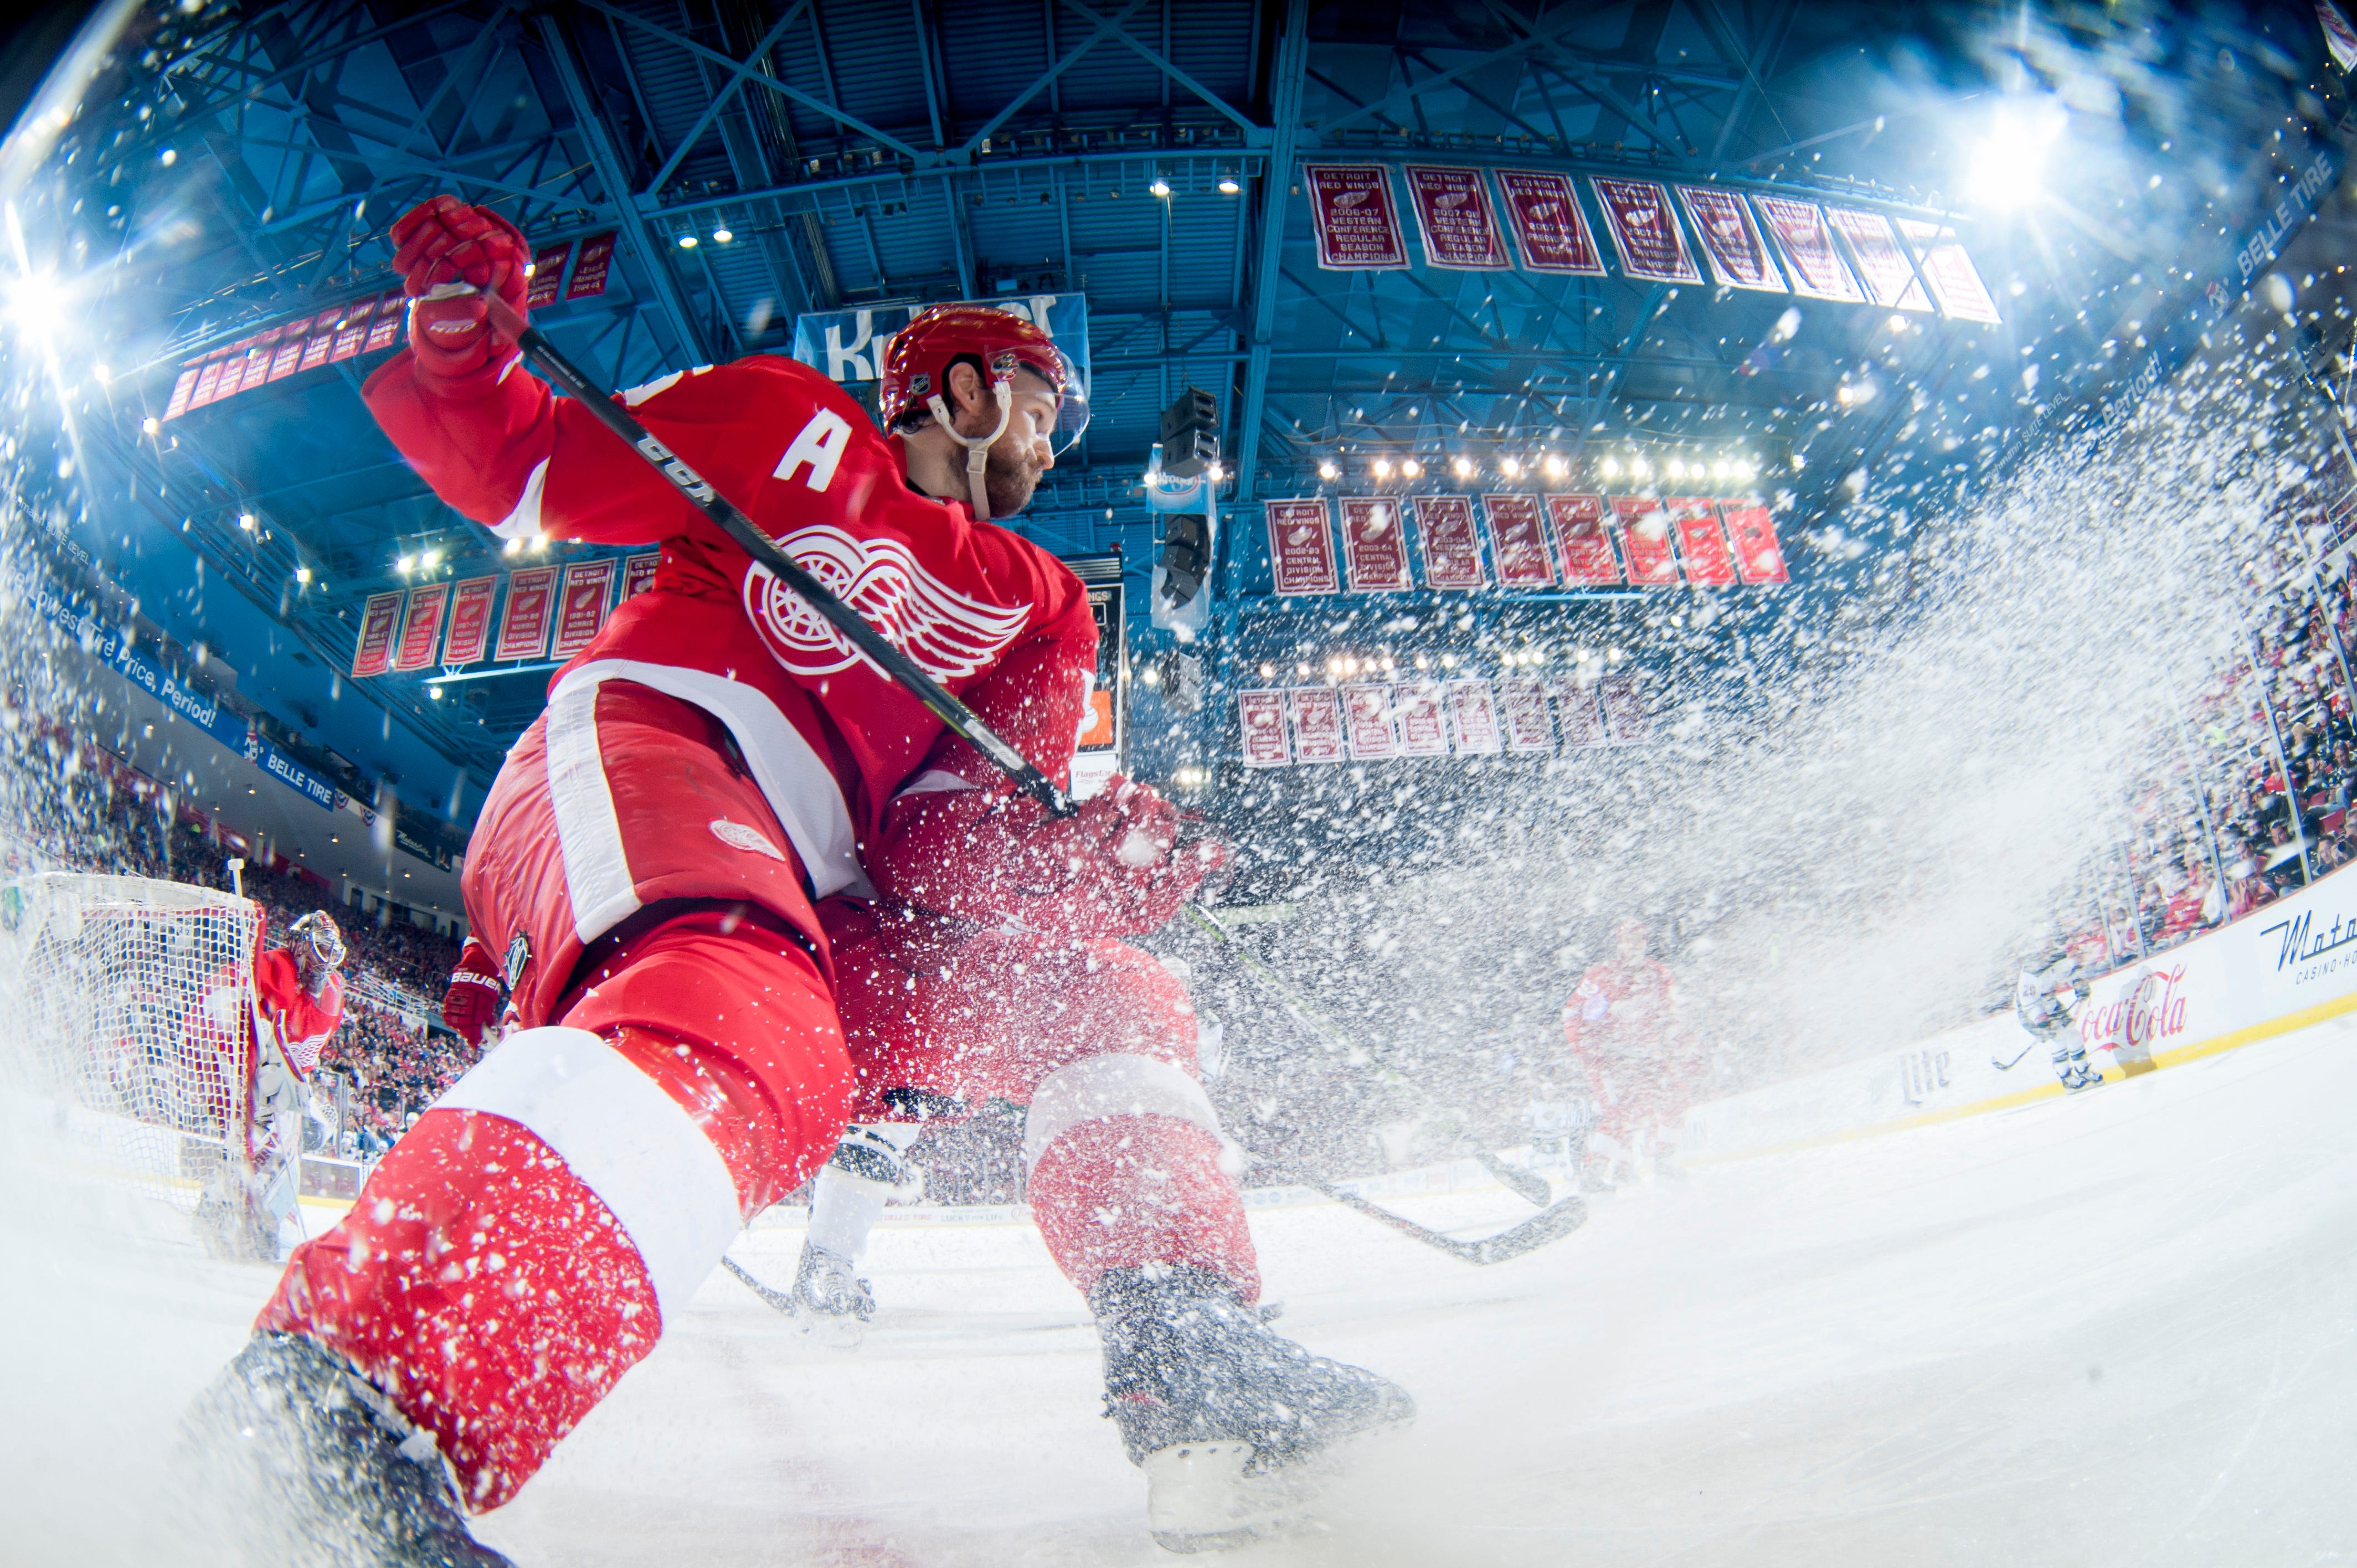 Detroit defenseman Niklas Kronwall sprays ice while making a play for the puck during a game against the Minnesota Wild at Joe Louis Arena in Detroit on Jan. 20, 2015.